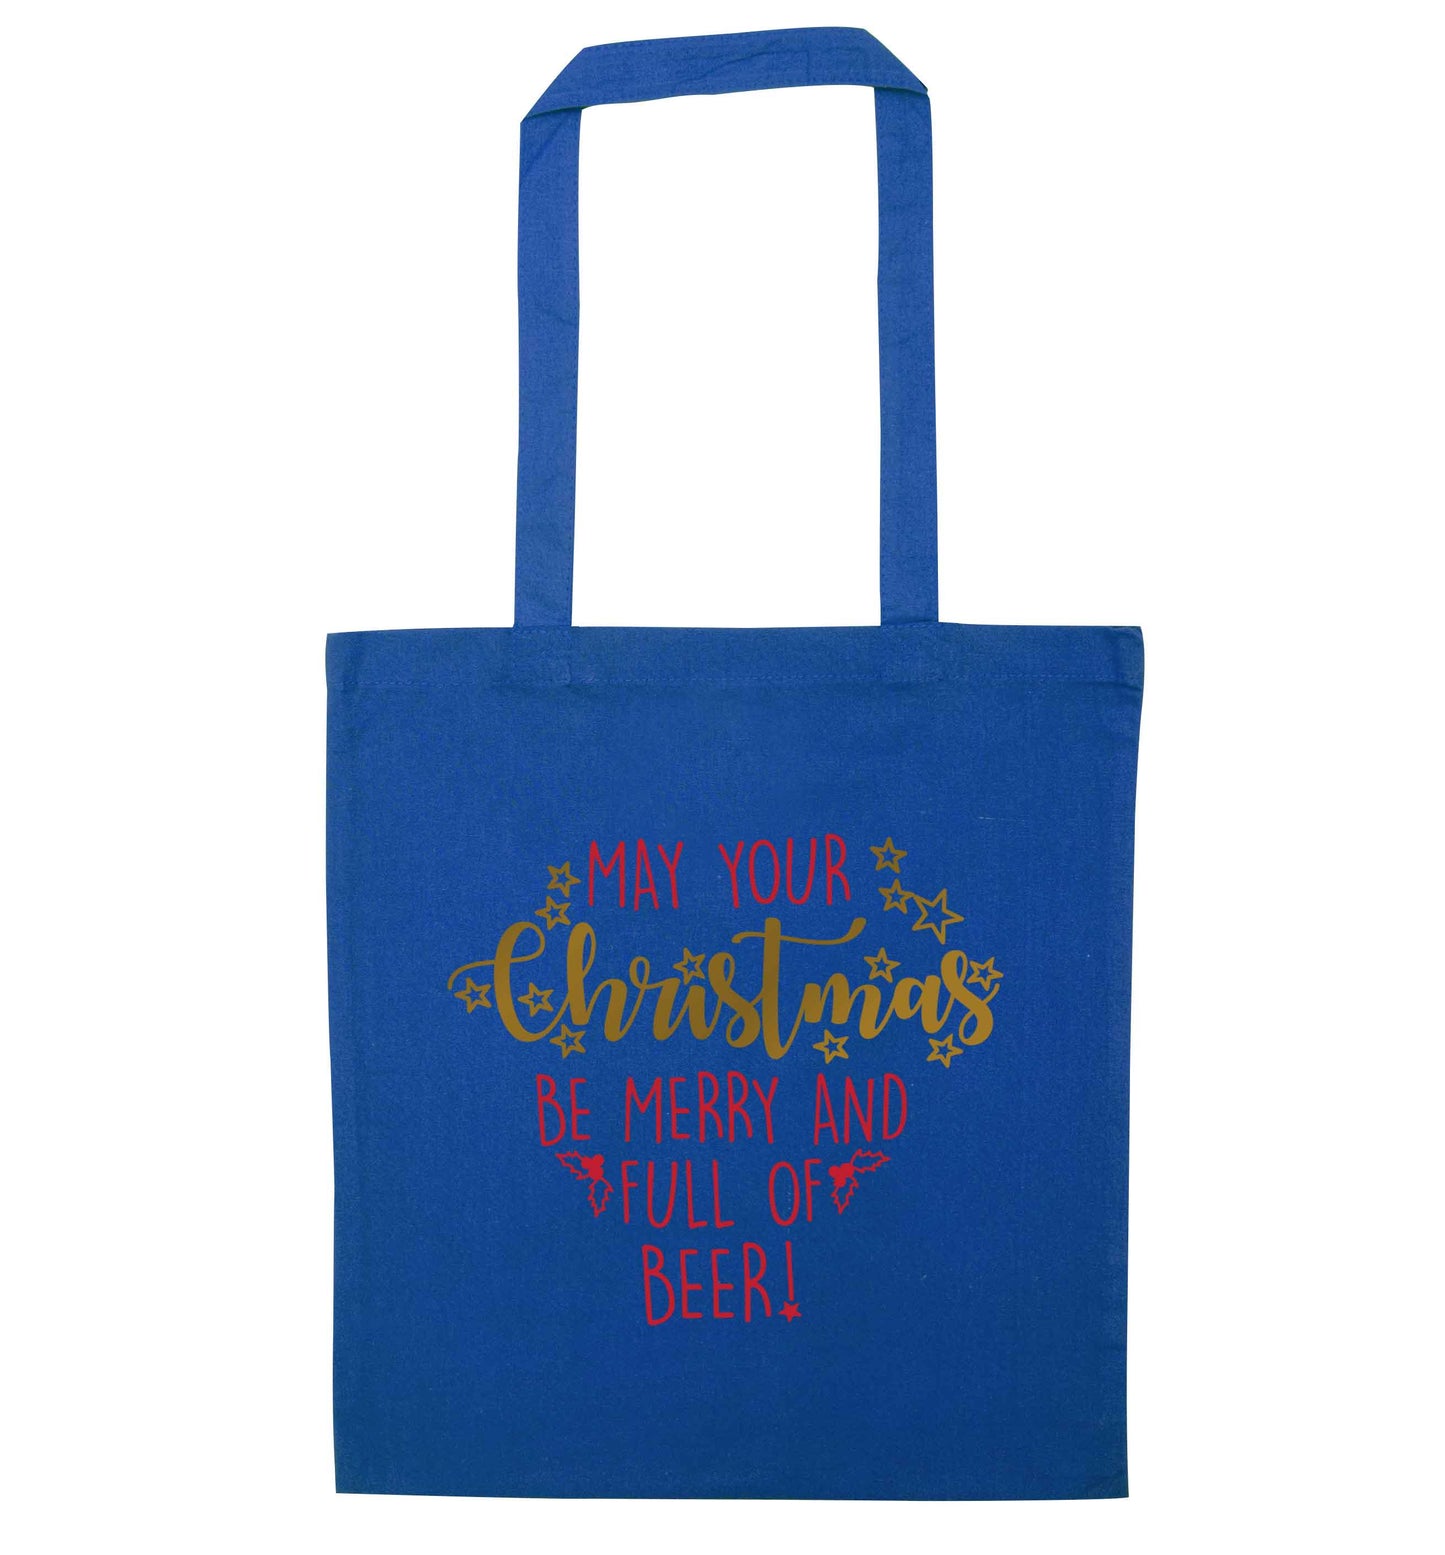 May your Christmas be merry and full of beer blue tote bag